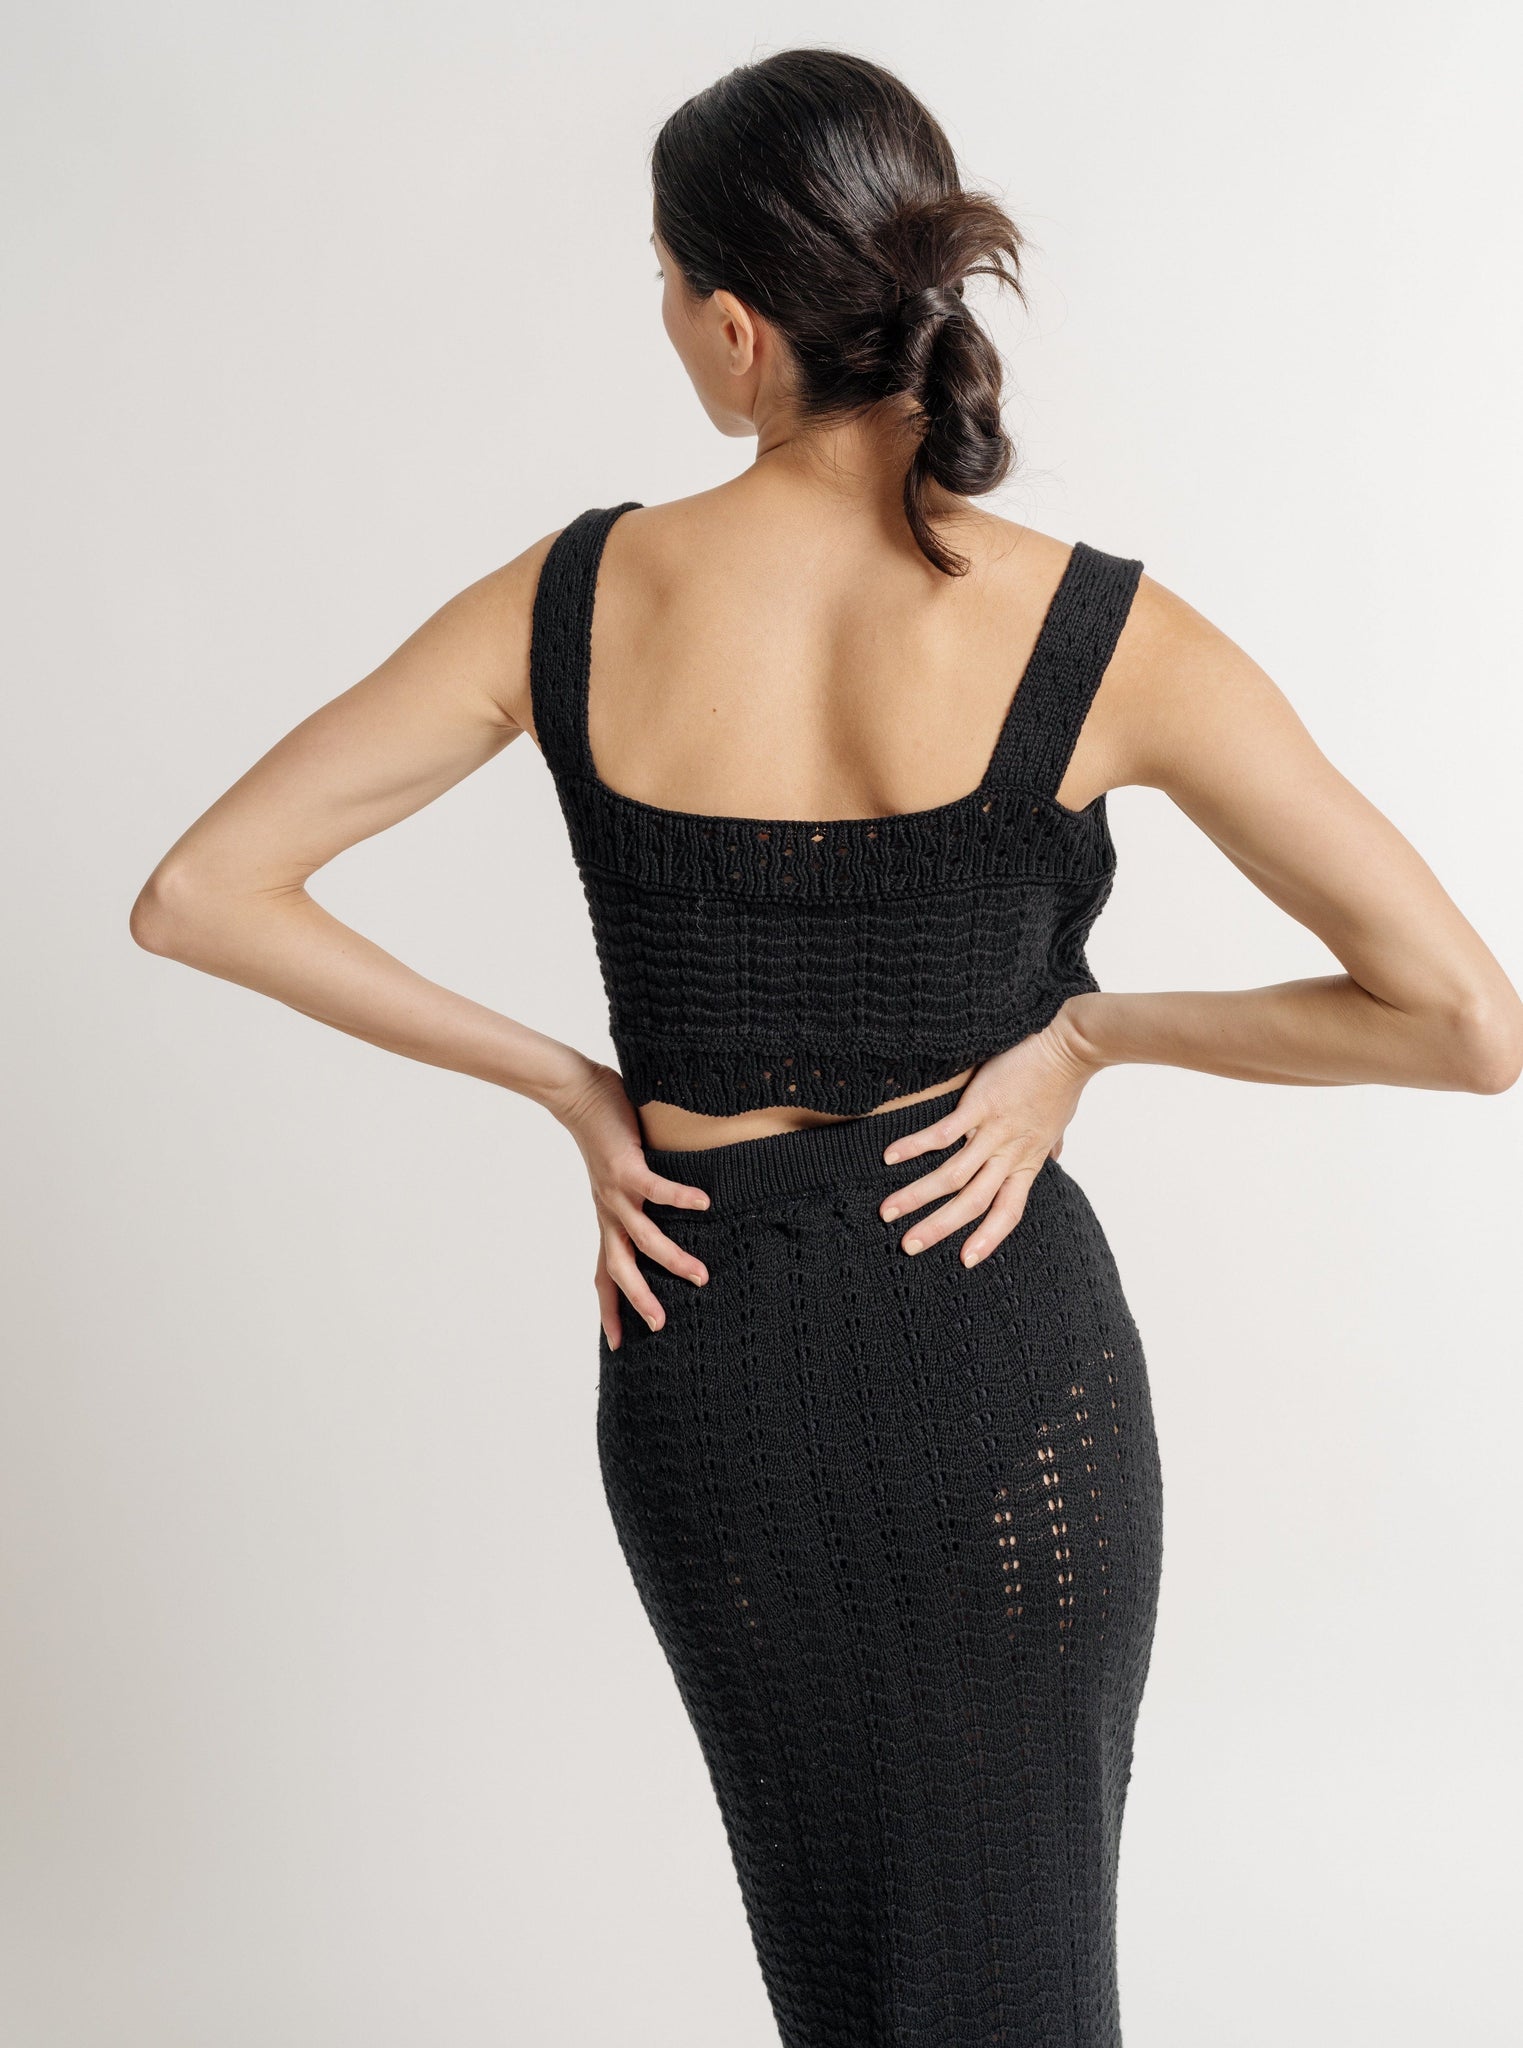 The back view of a woman wearing the Lyric Crochet Crop Tank - Black - Pre-order.